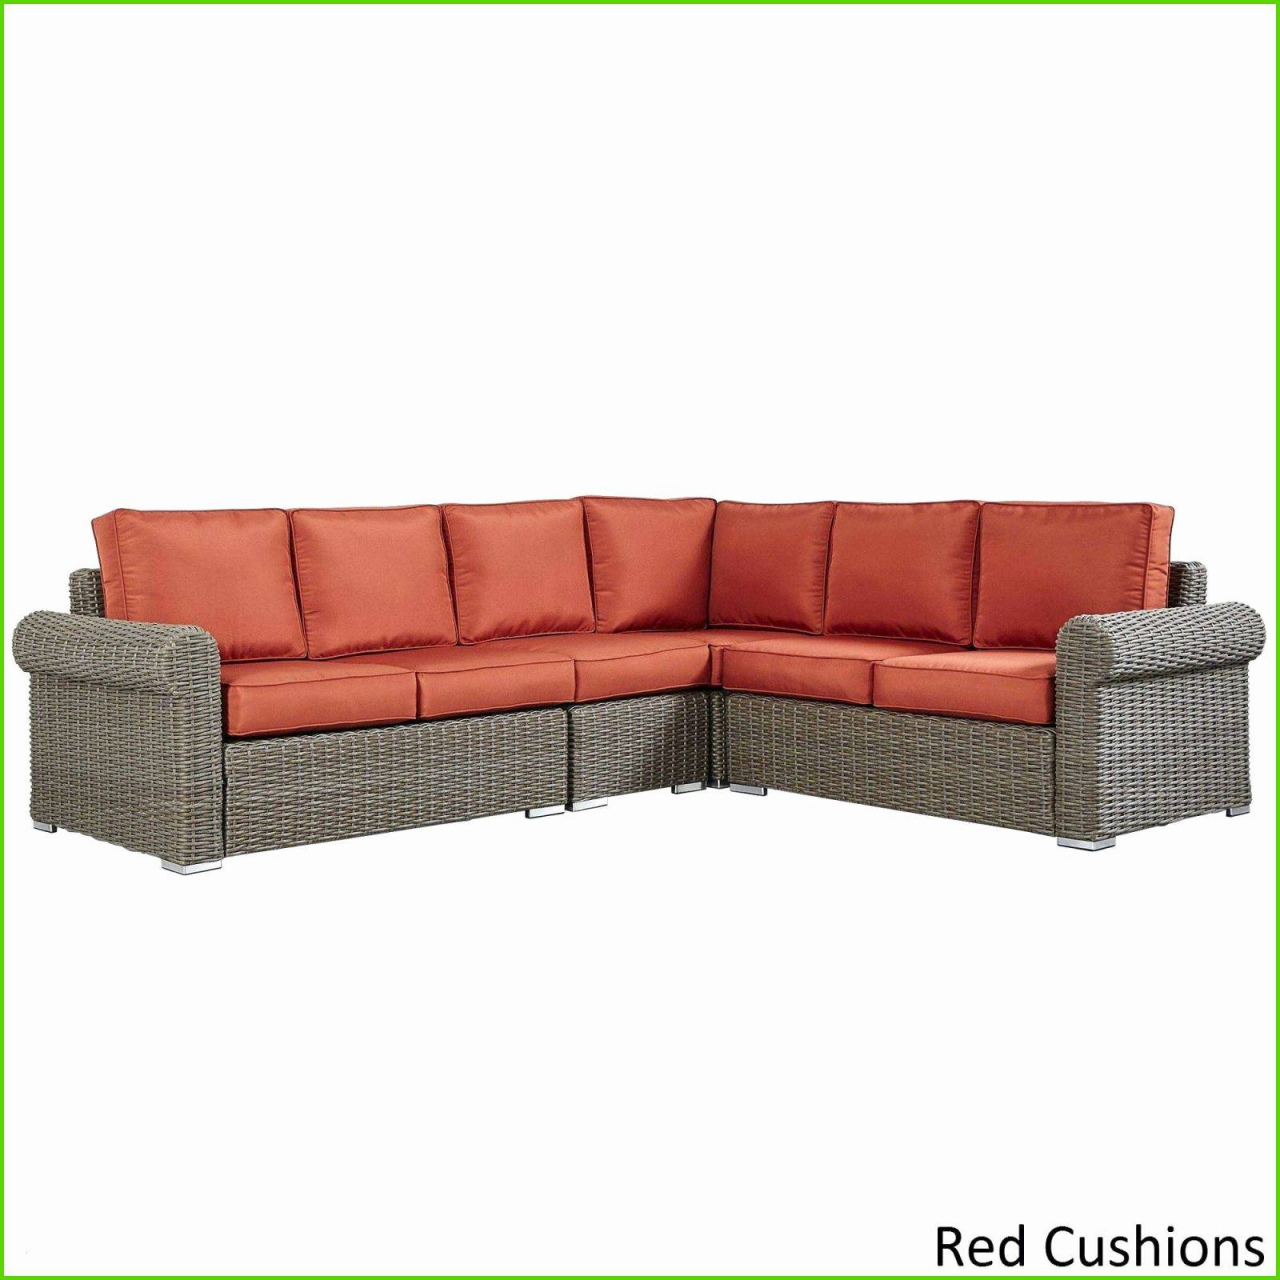 patio daybed outdoor sofa holz rattan outdoor furniture fresh sofa design durch patio daybed 1